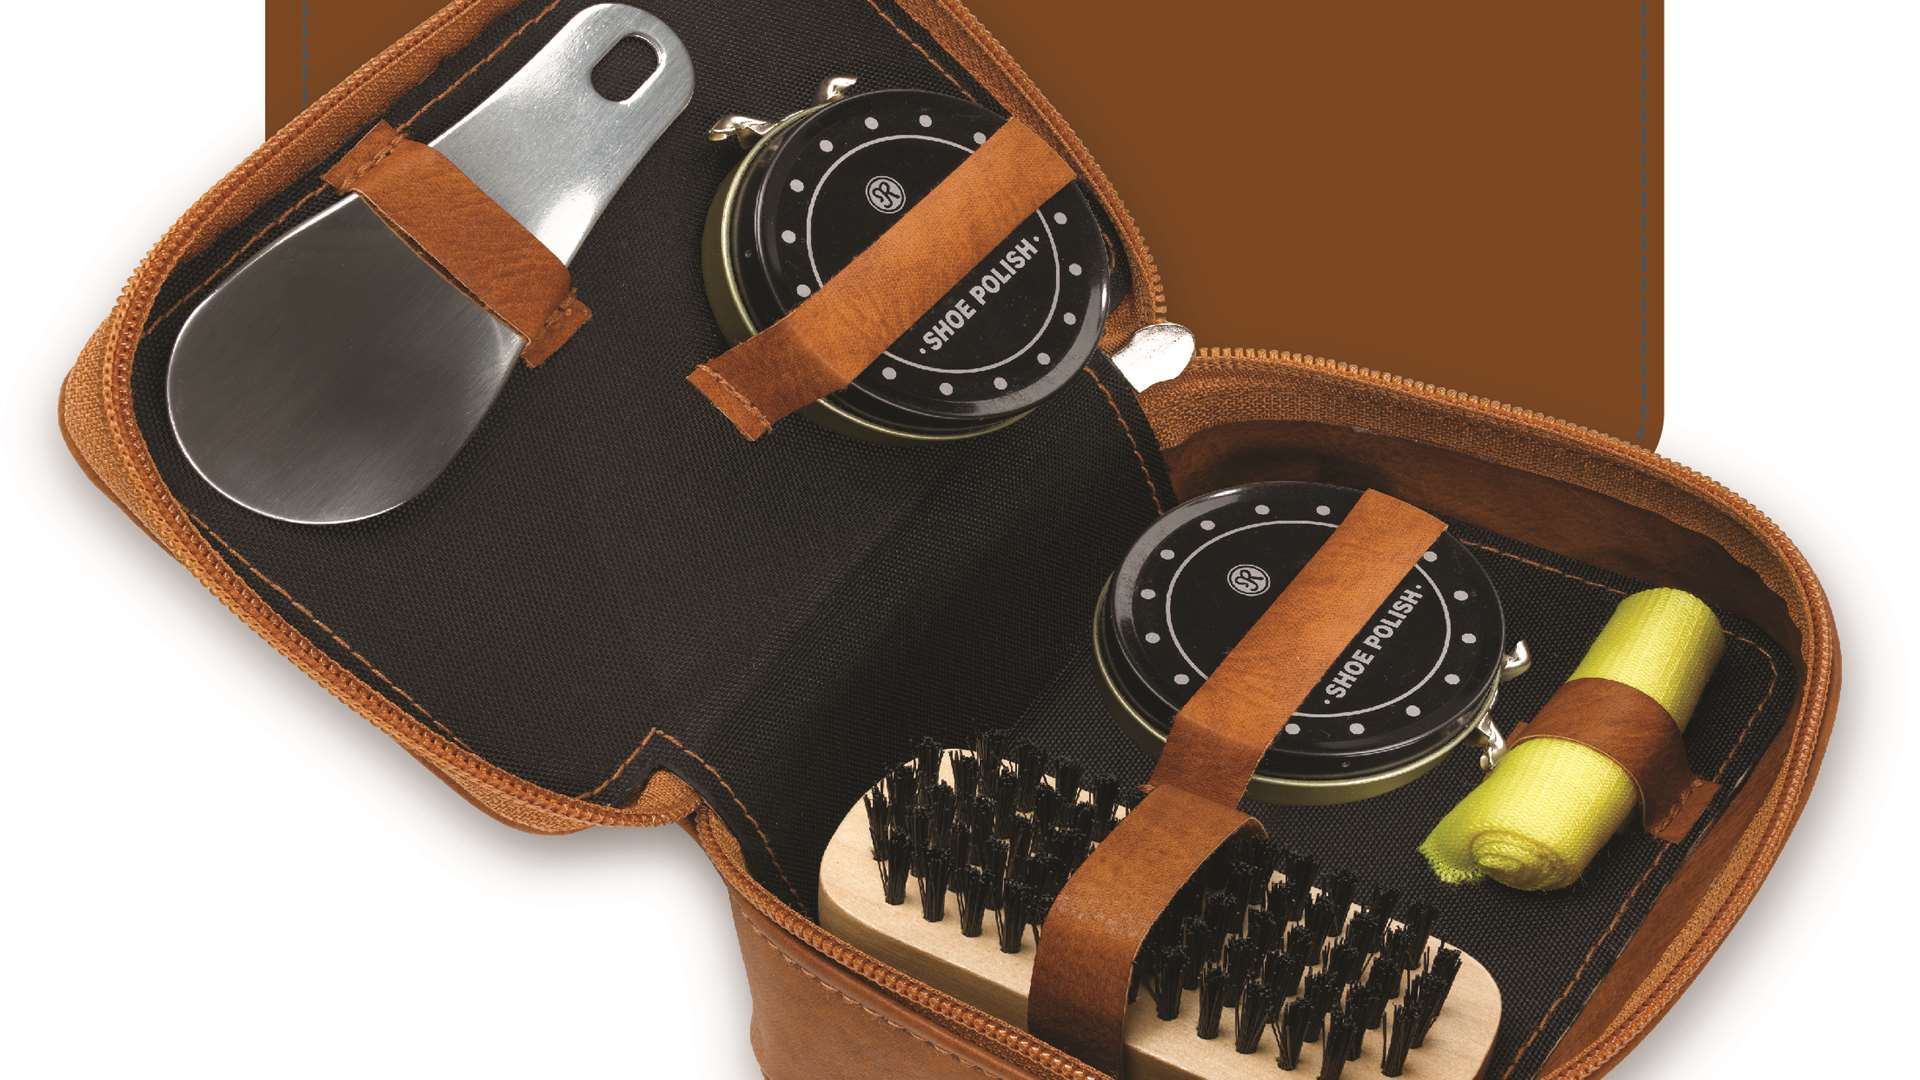 A handy shoeshine kit in a compact pack, £9.99, Moderno at WH Smith